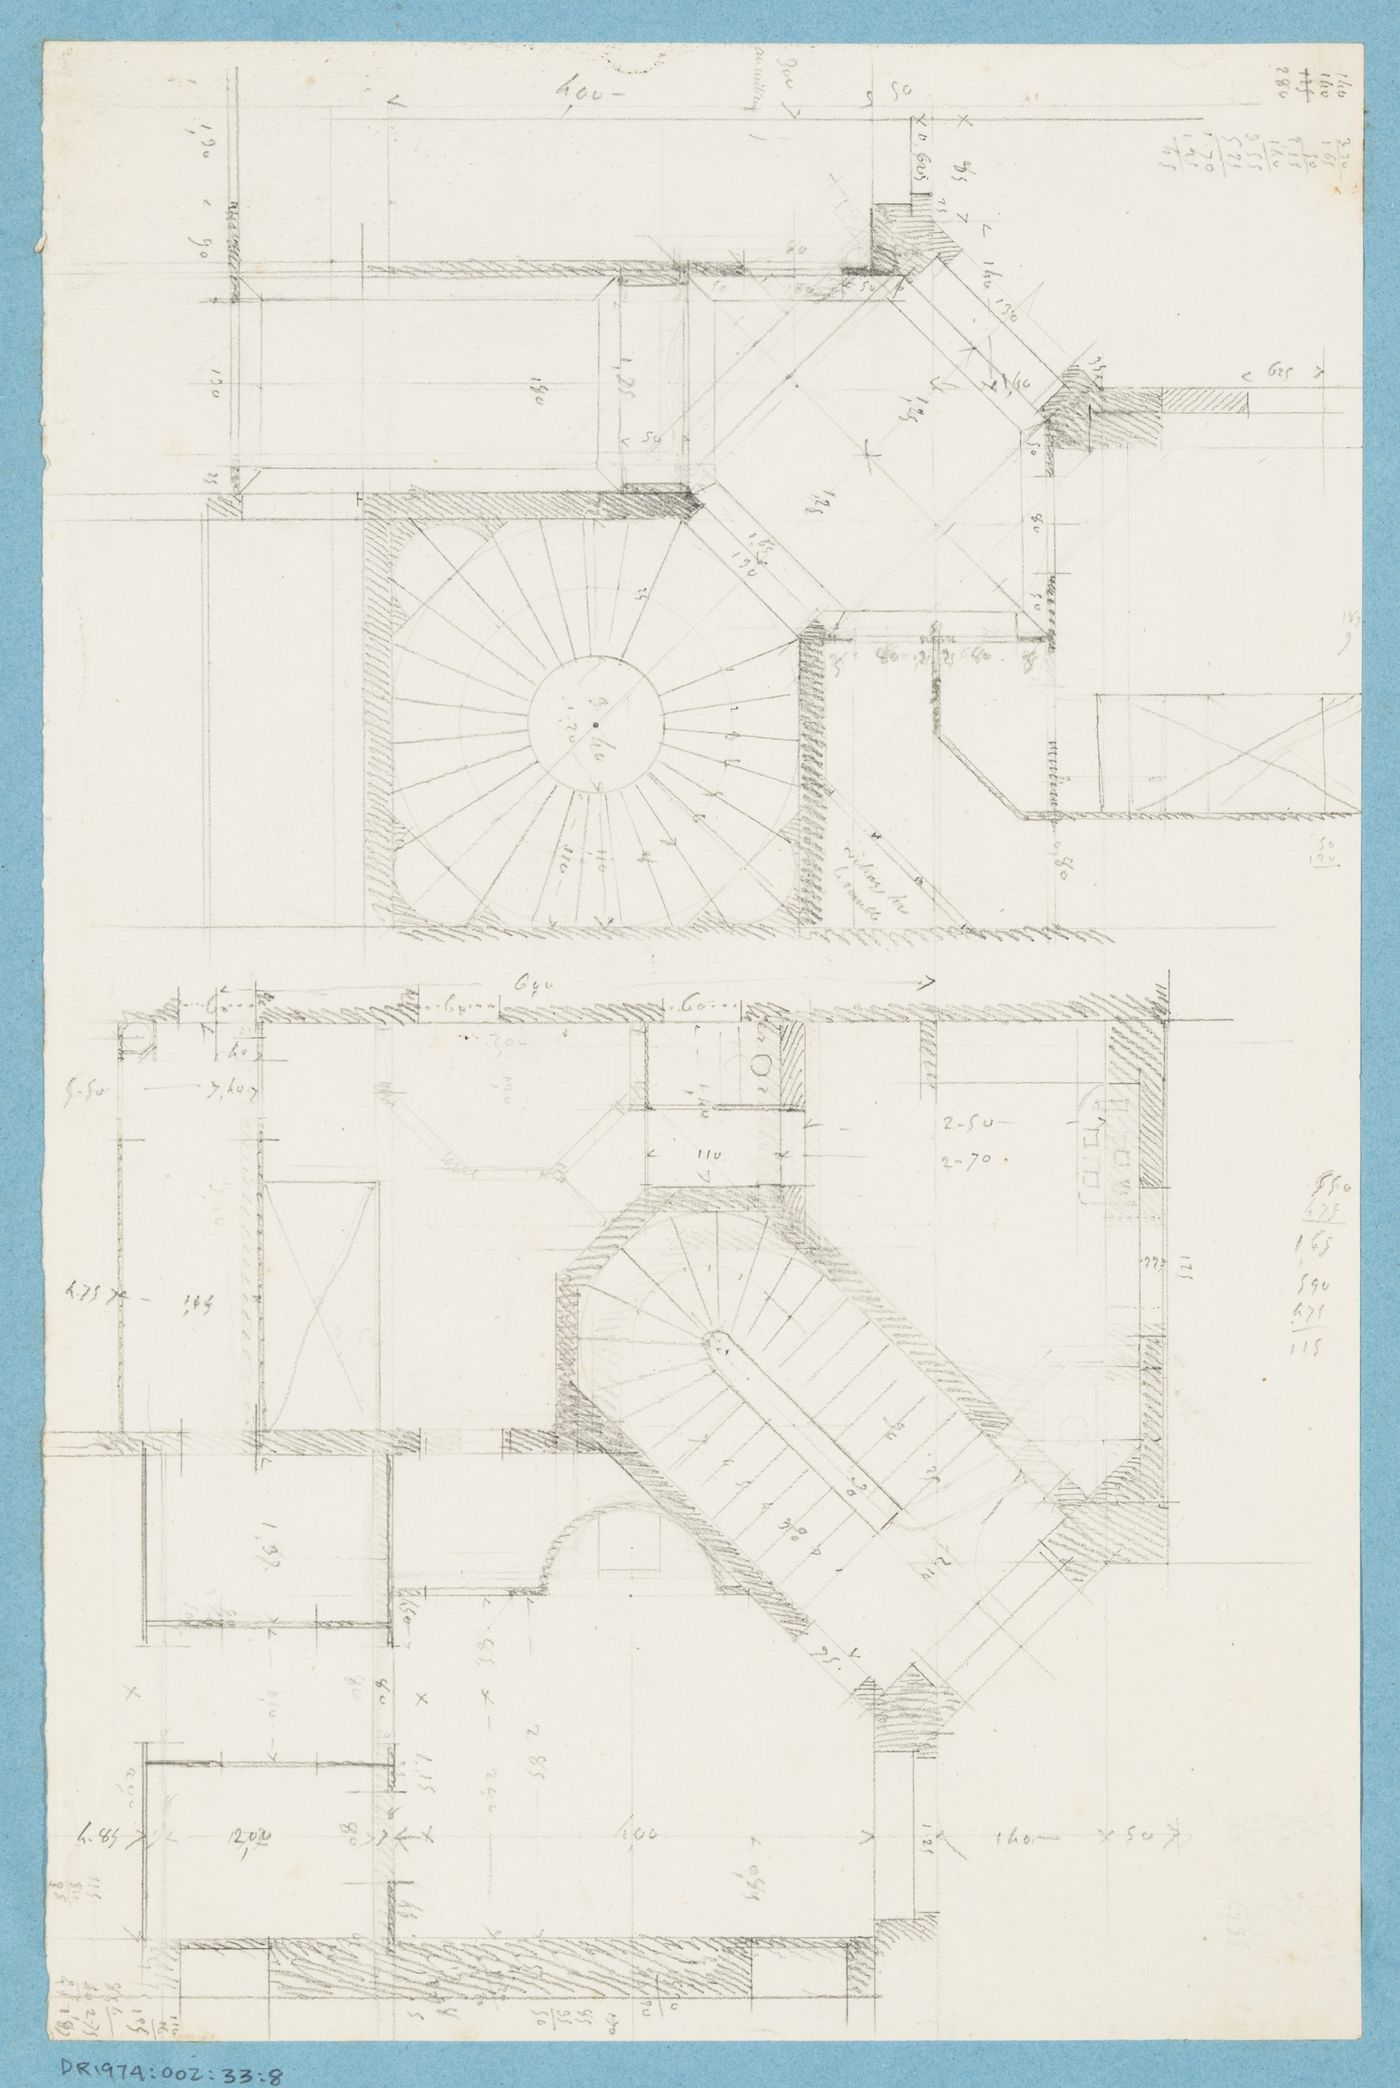 Project for a hôtel for M. Busche: Partial plans showing the stairs for a four-storey hôtel